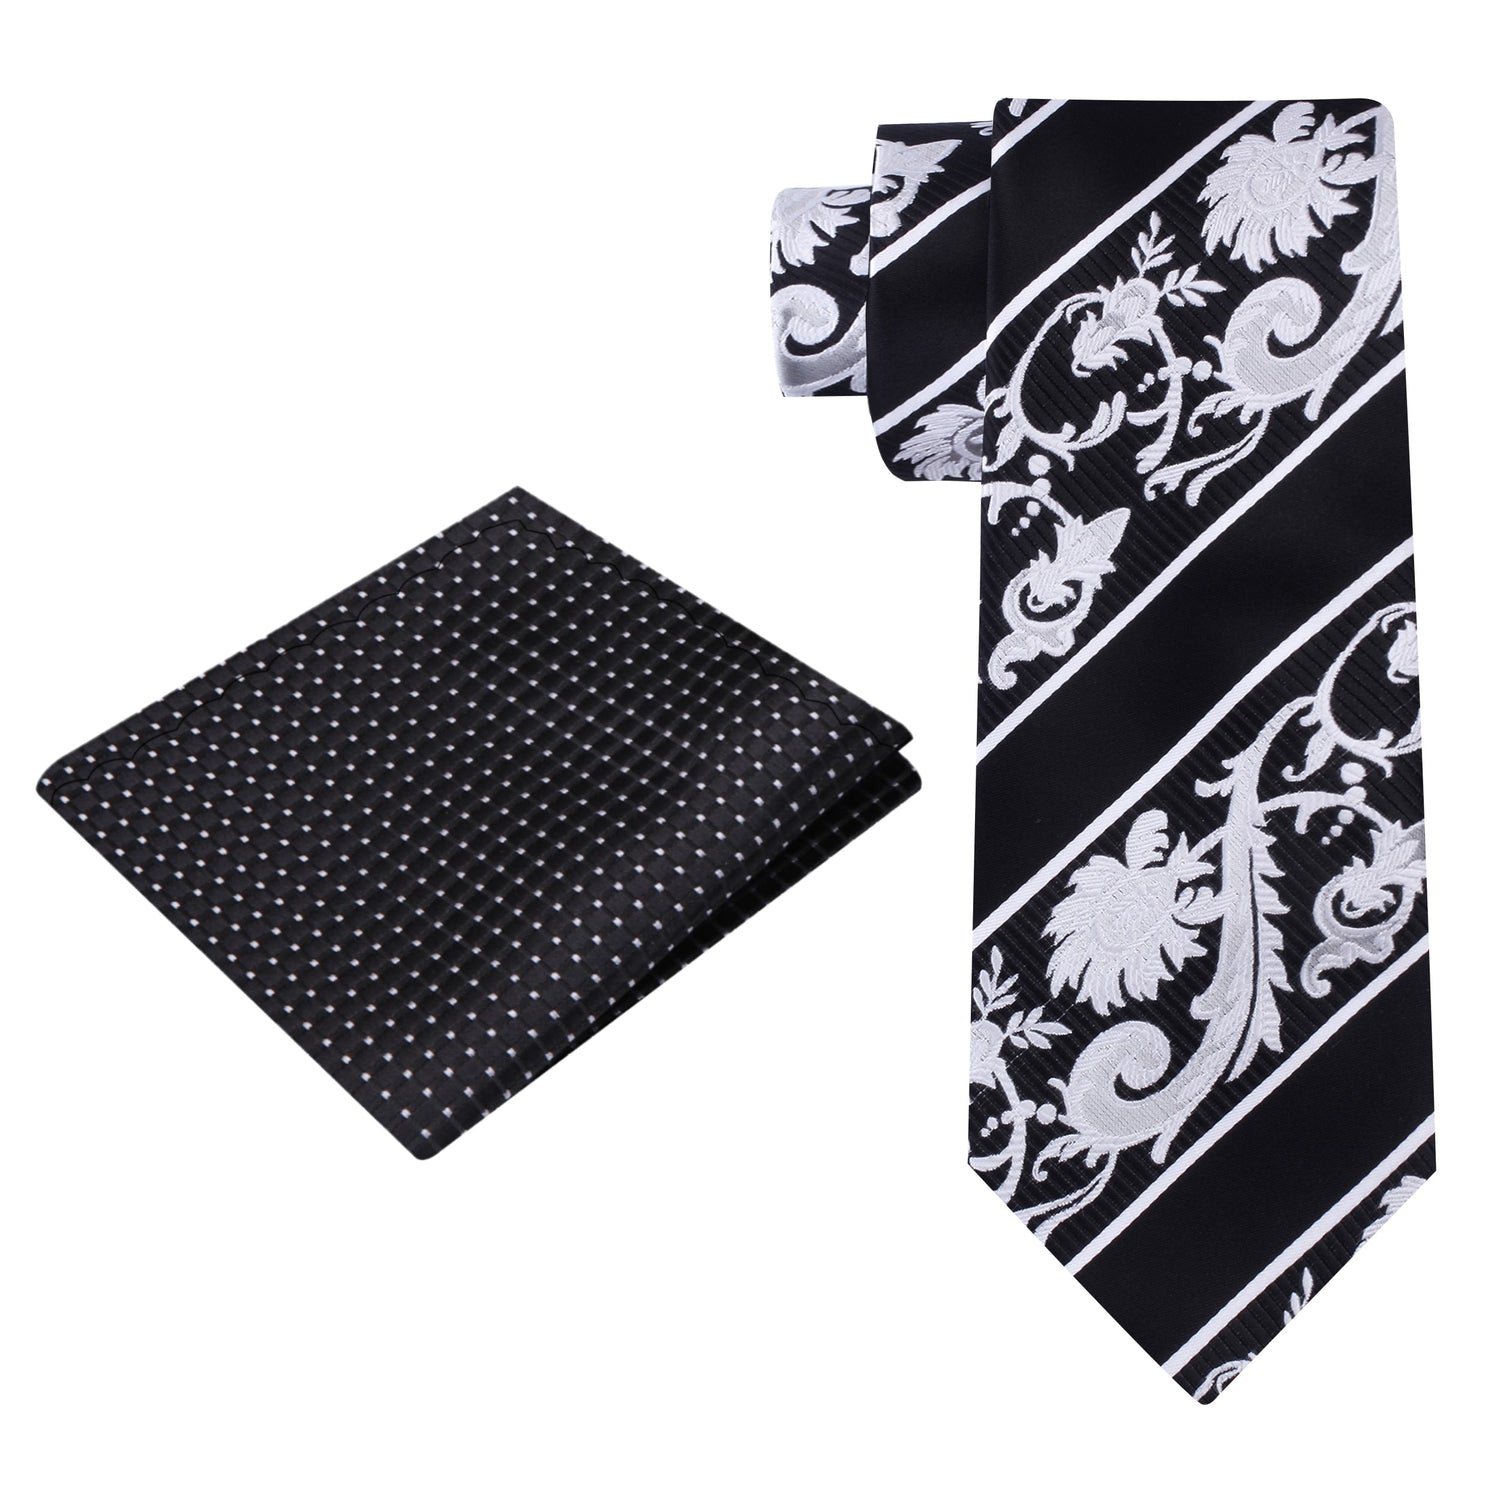 Alt View: Black, Grey, White Floral Tie and Accenting Pocket Square